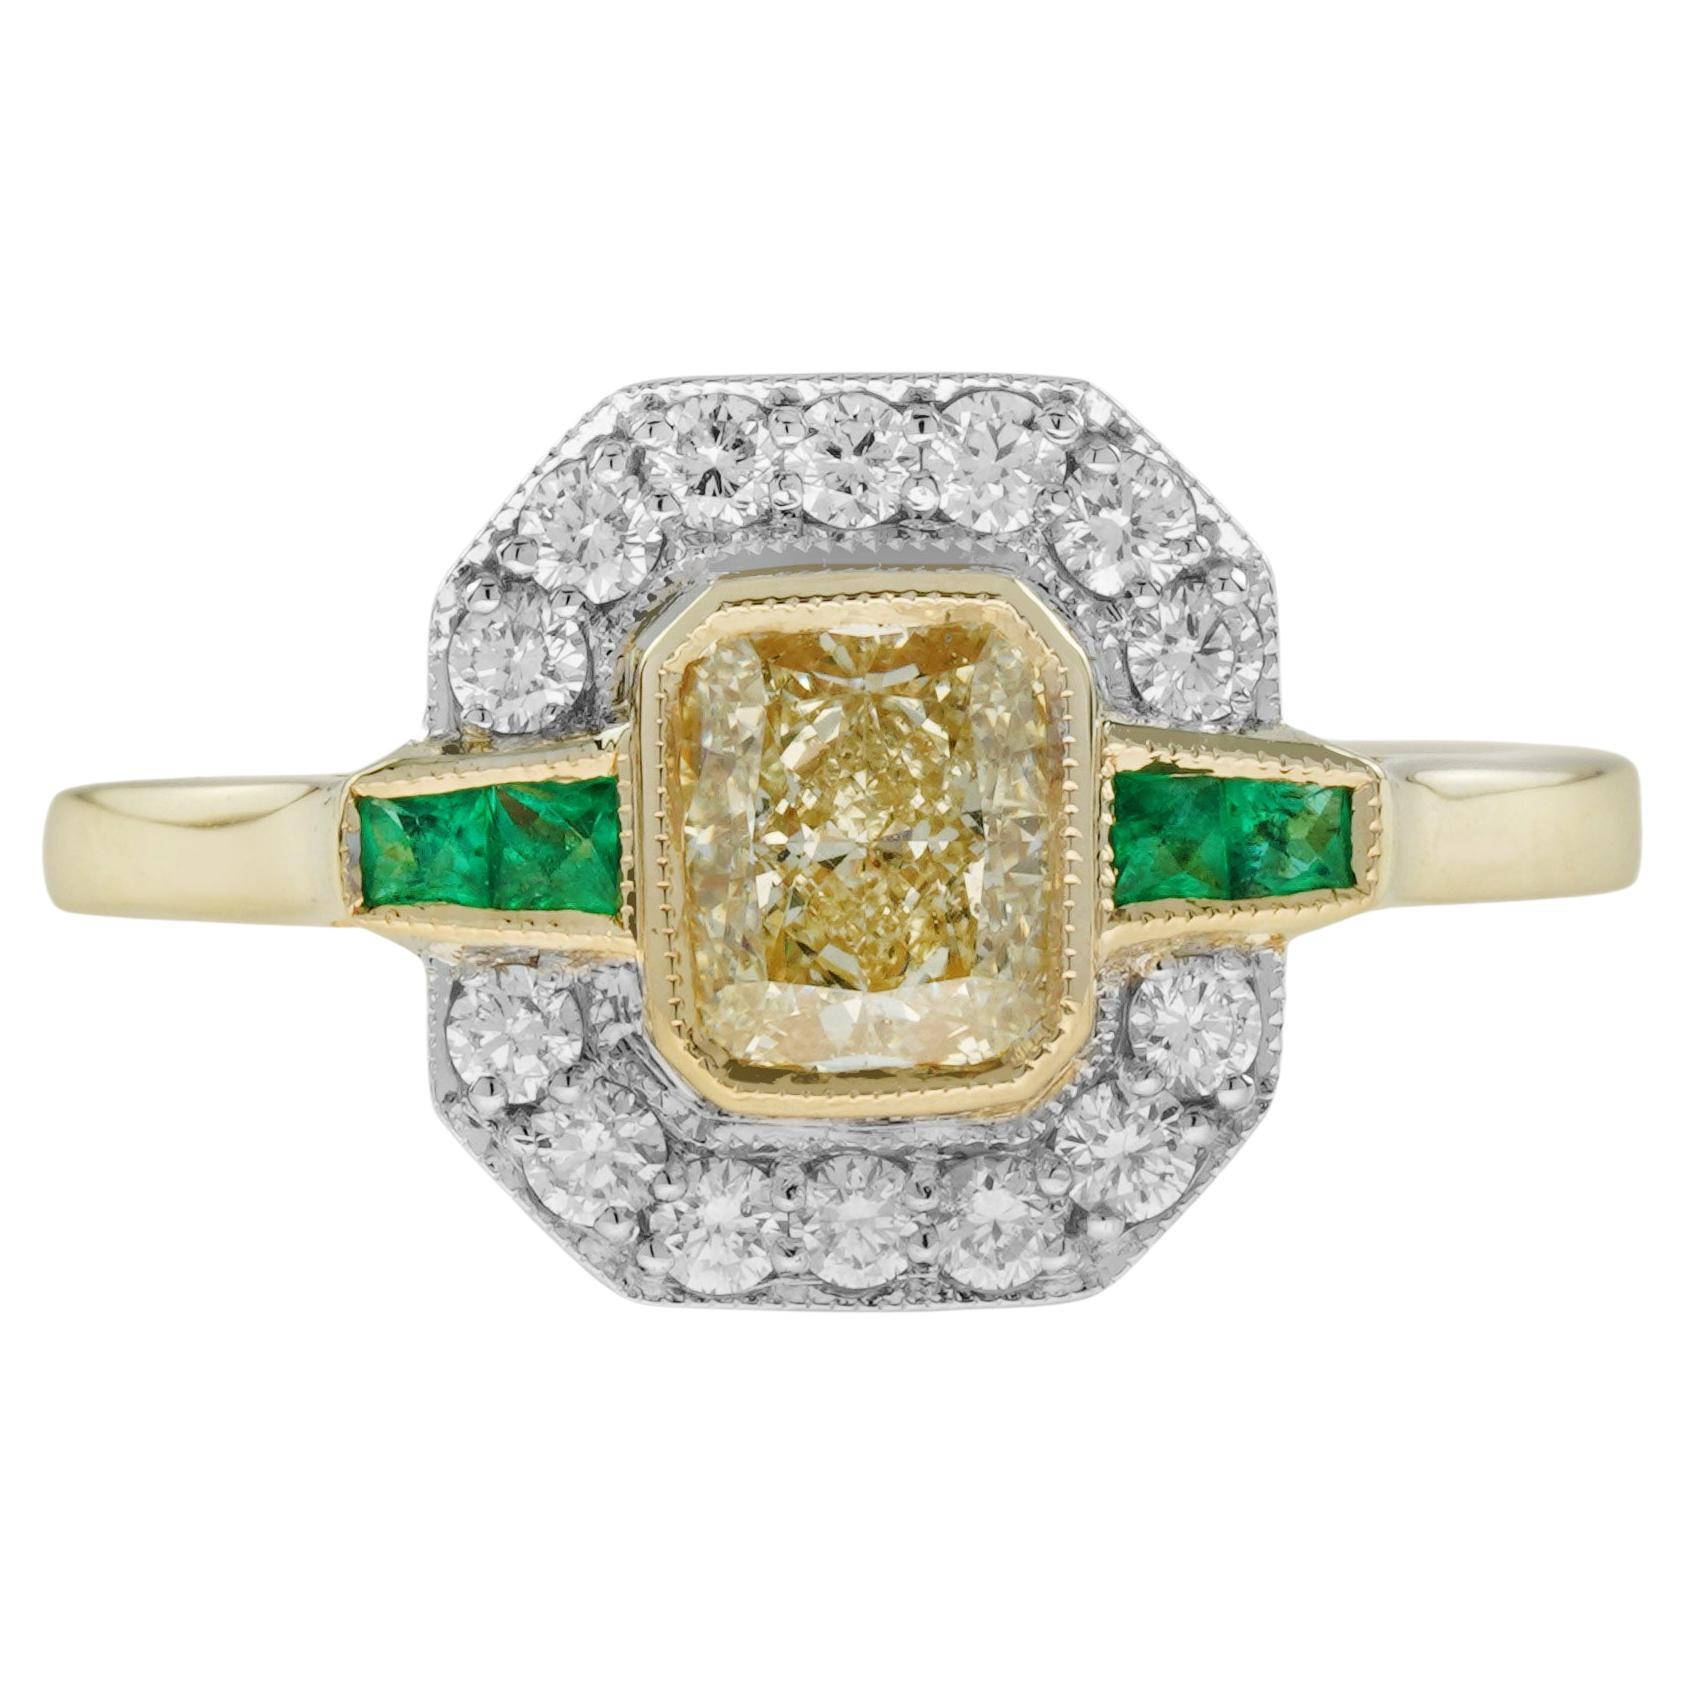 GIA Diamond and Emerald Art Deco Style Engagement Ring in 18K Yellow Gold